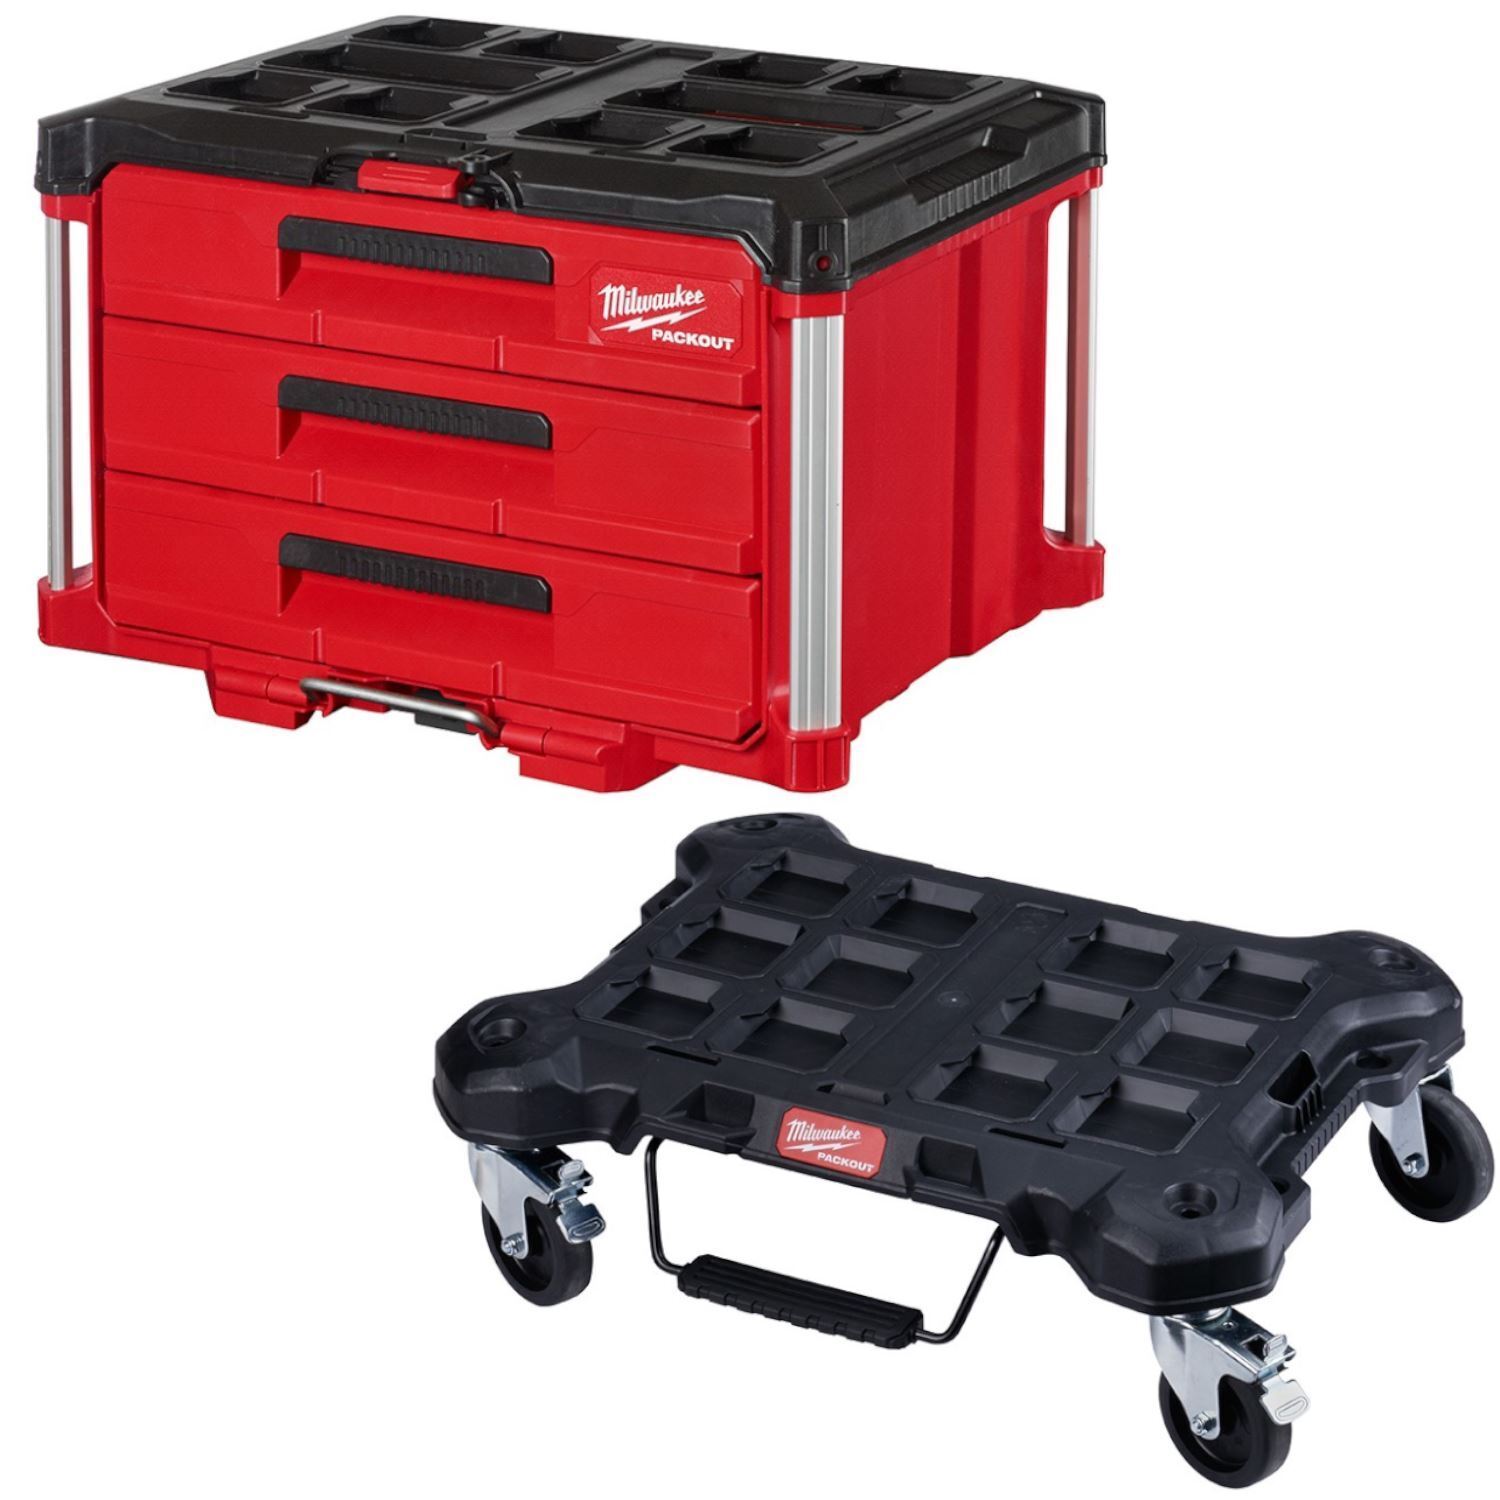 Milwaukee 48-22-8443 Packout 3-Drawer Tool Box W/48-22-8410 Packout Dolly